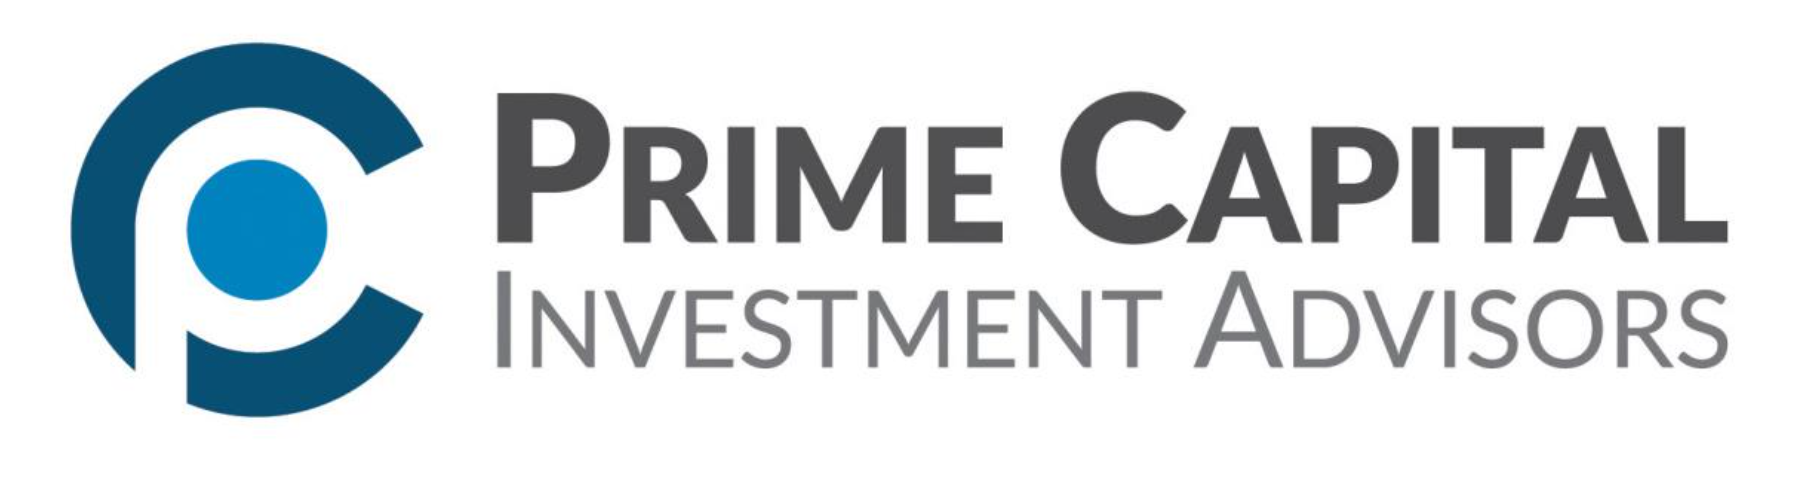 STONNINGTON GROUP HAS BEEN ACQUIRED BY PRIME CAPITAL INVESTMENT ADVISORS